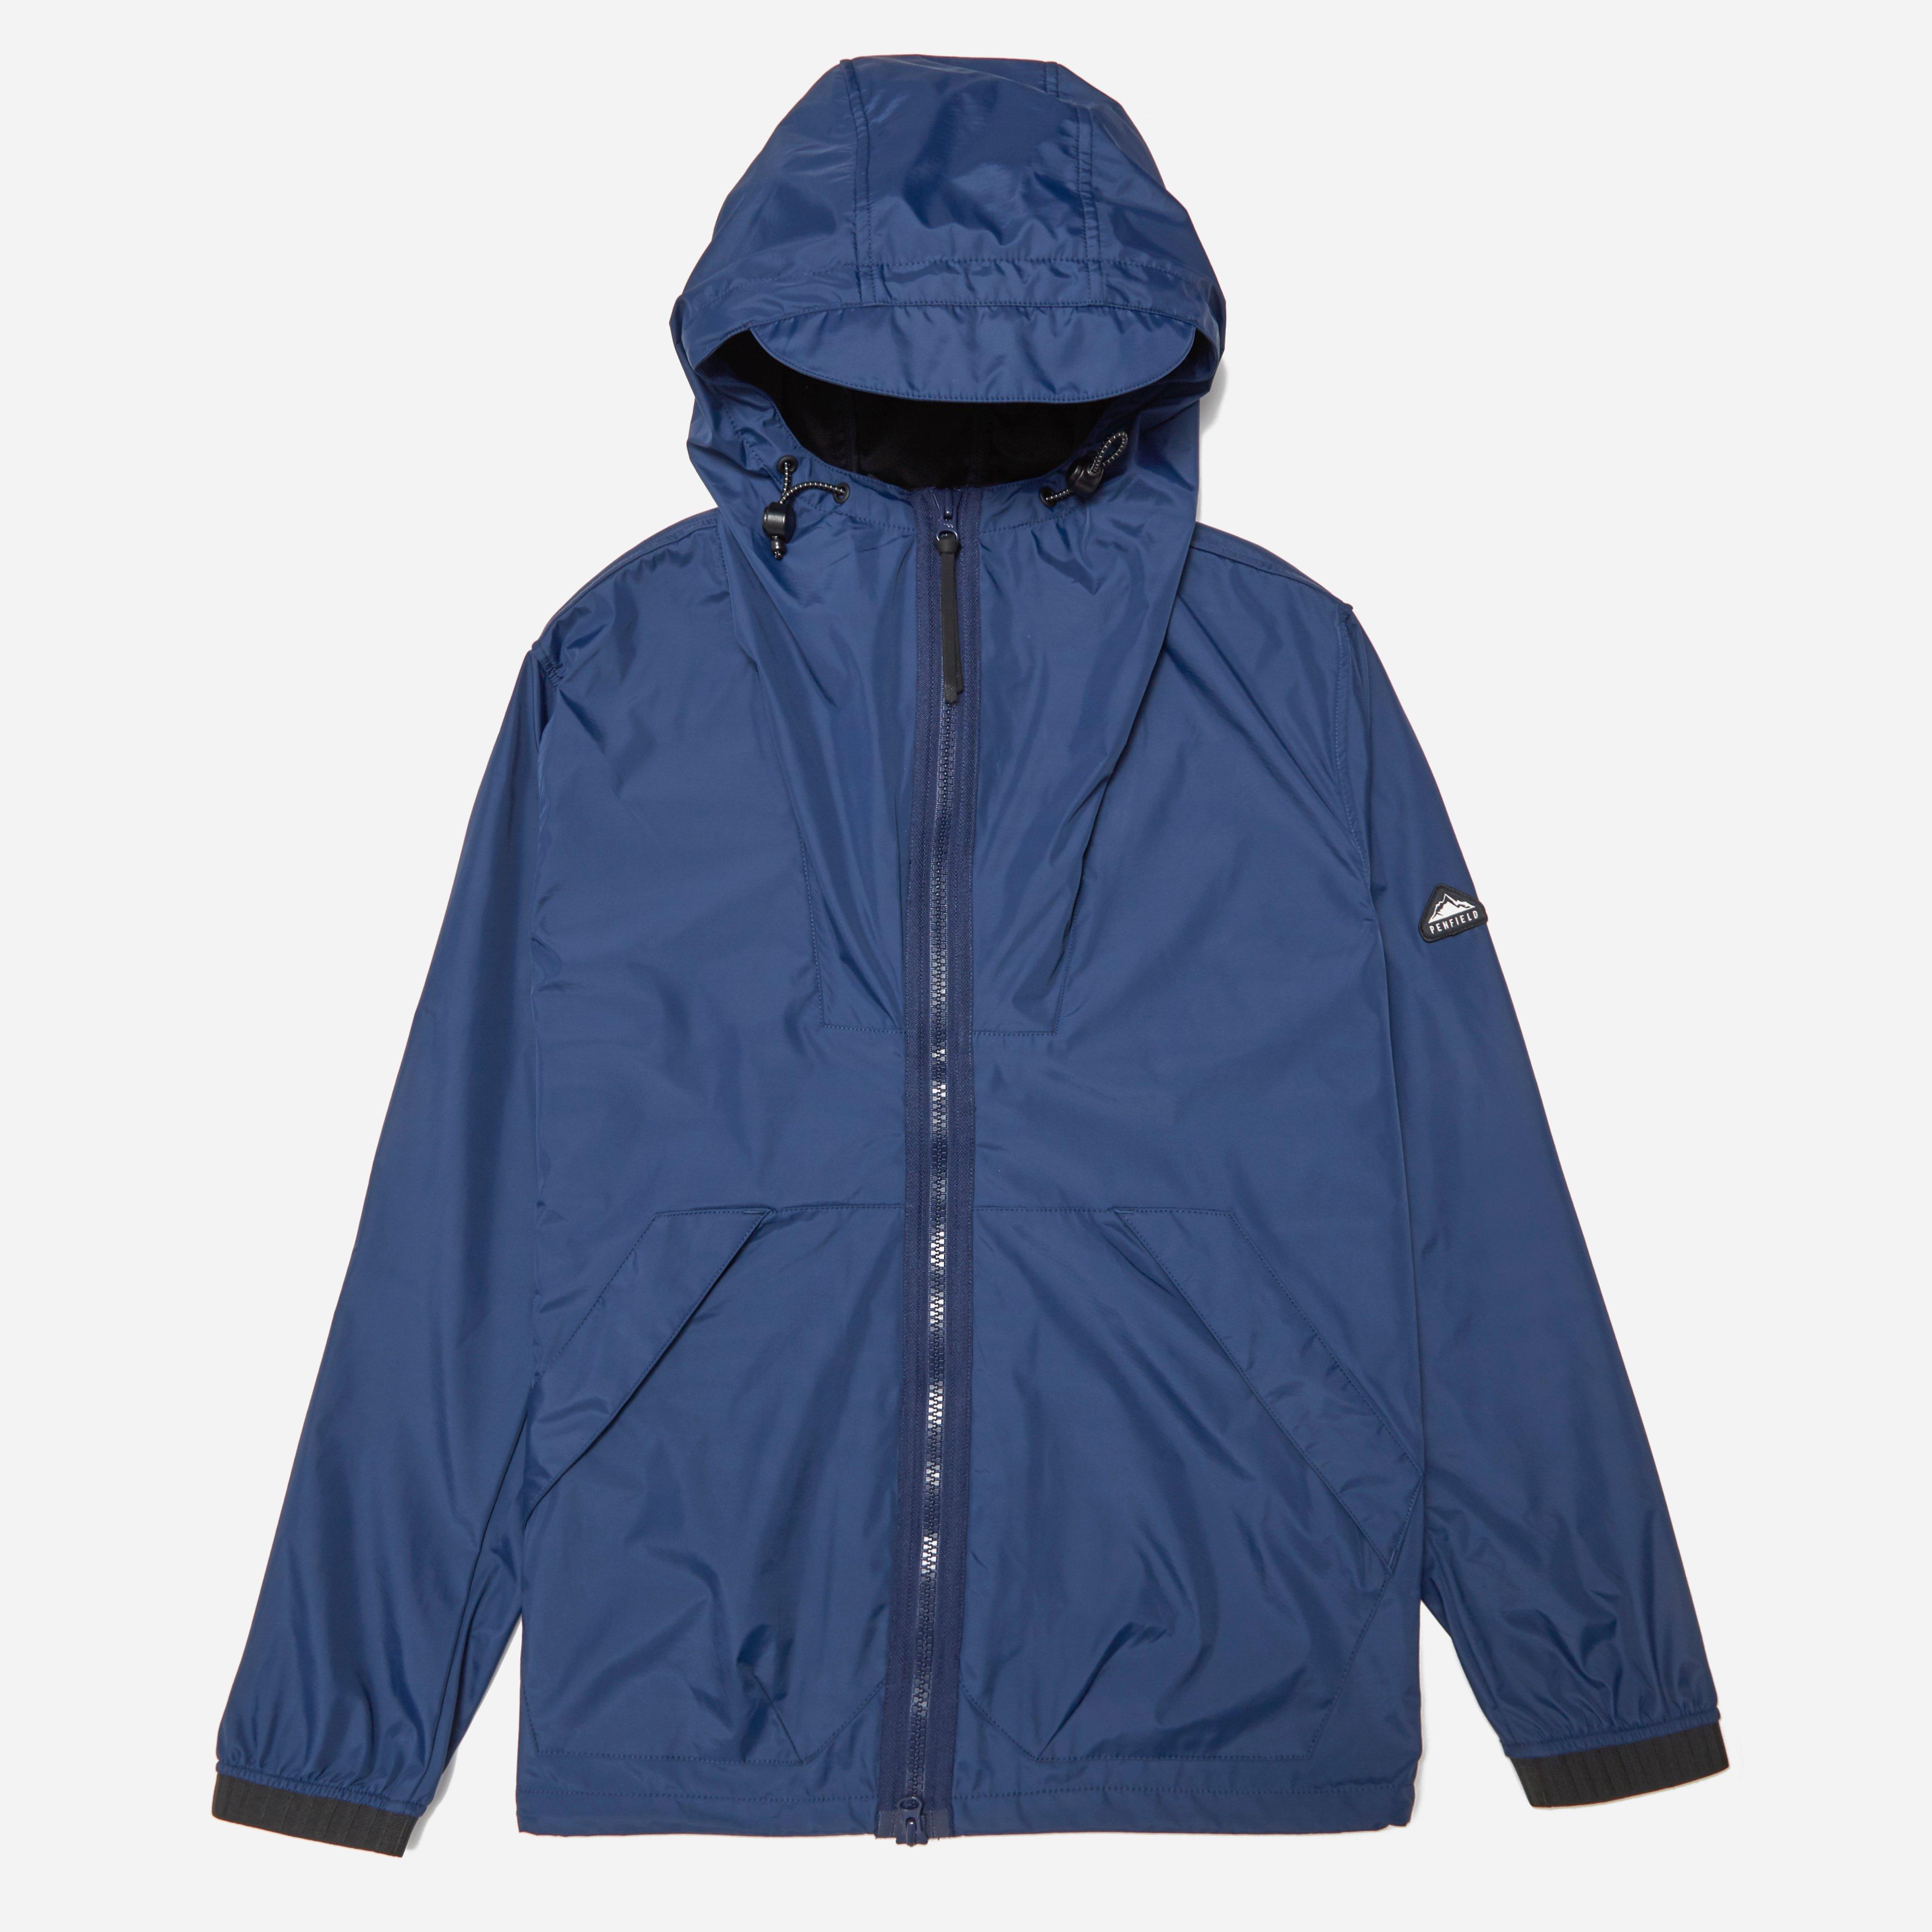 Lyst - Penfield Squall Jacket in Blue for Men - Save 1%